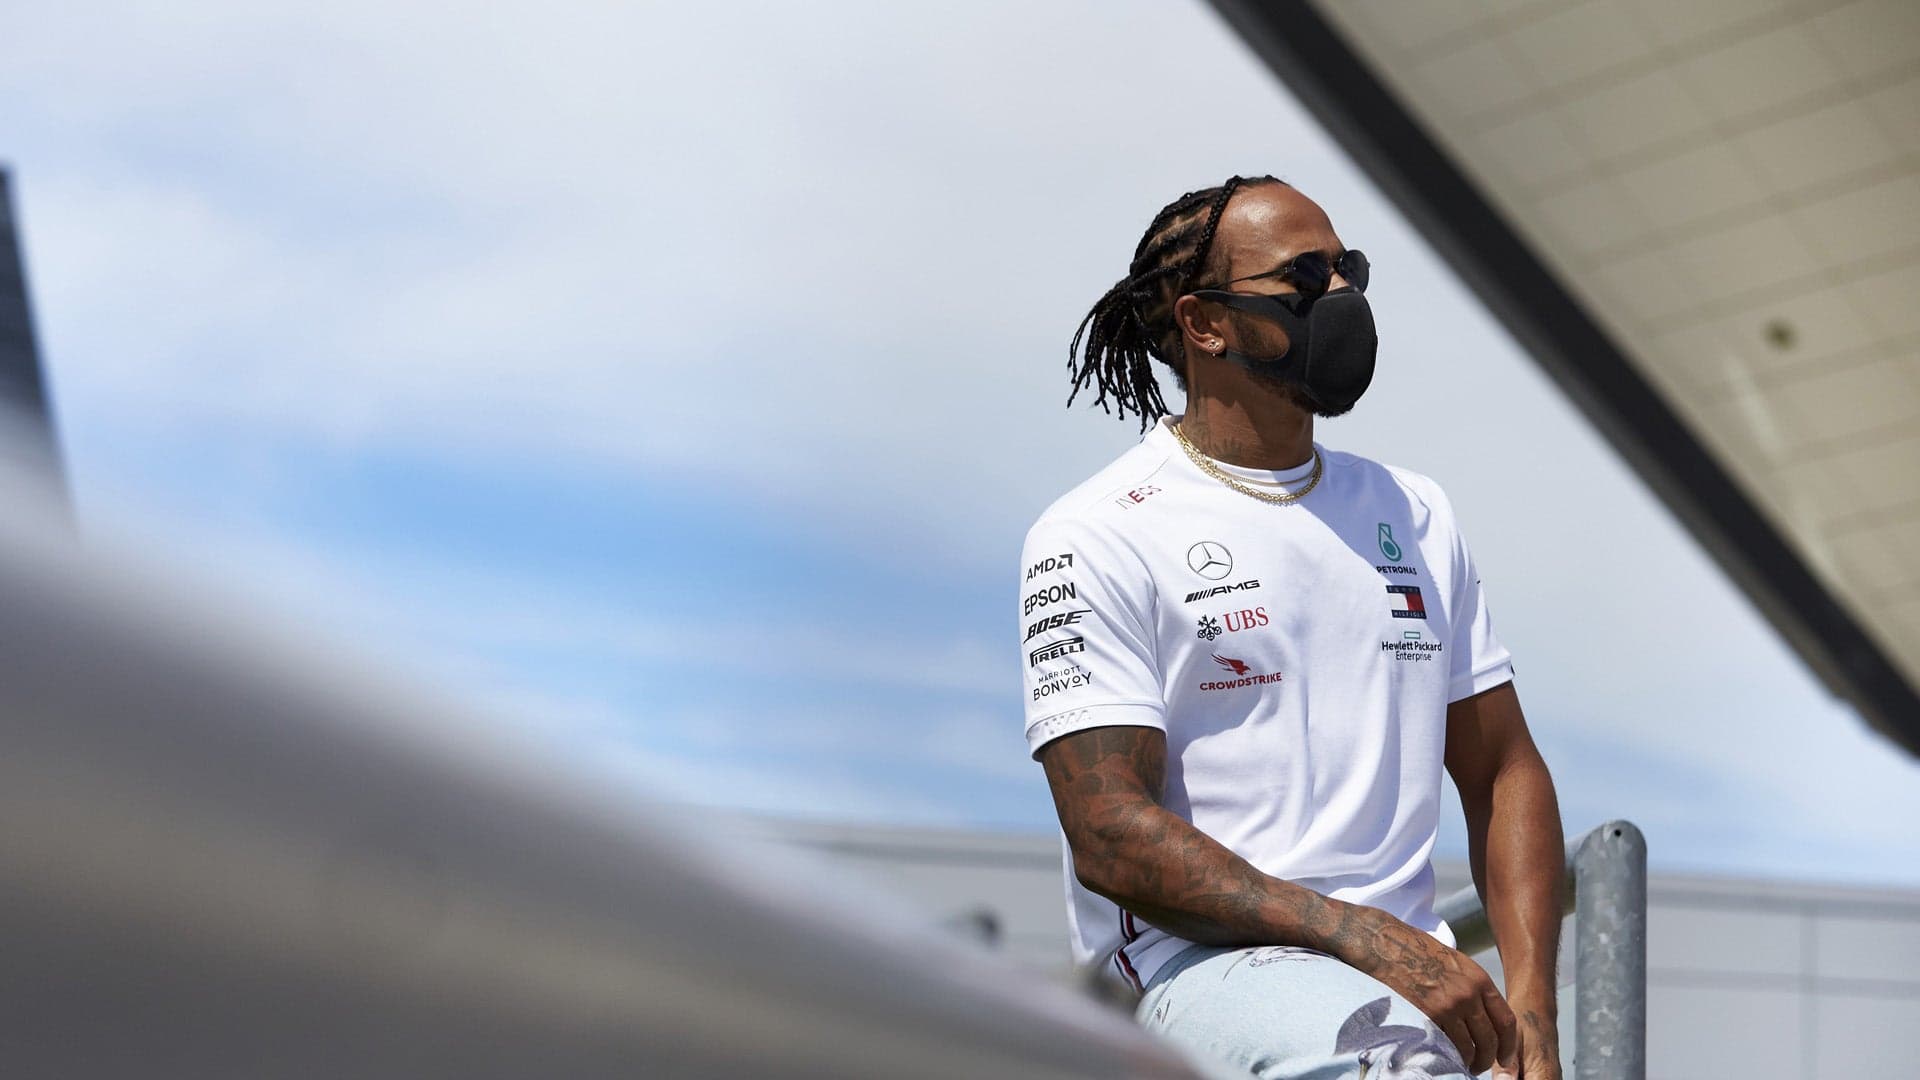 At Last, the FIA Is Asking F1 Fans to Stop Racially Abusing Hamilton